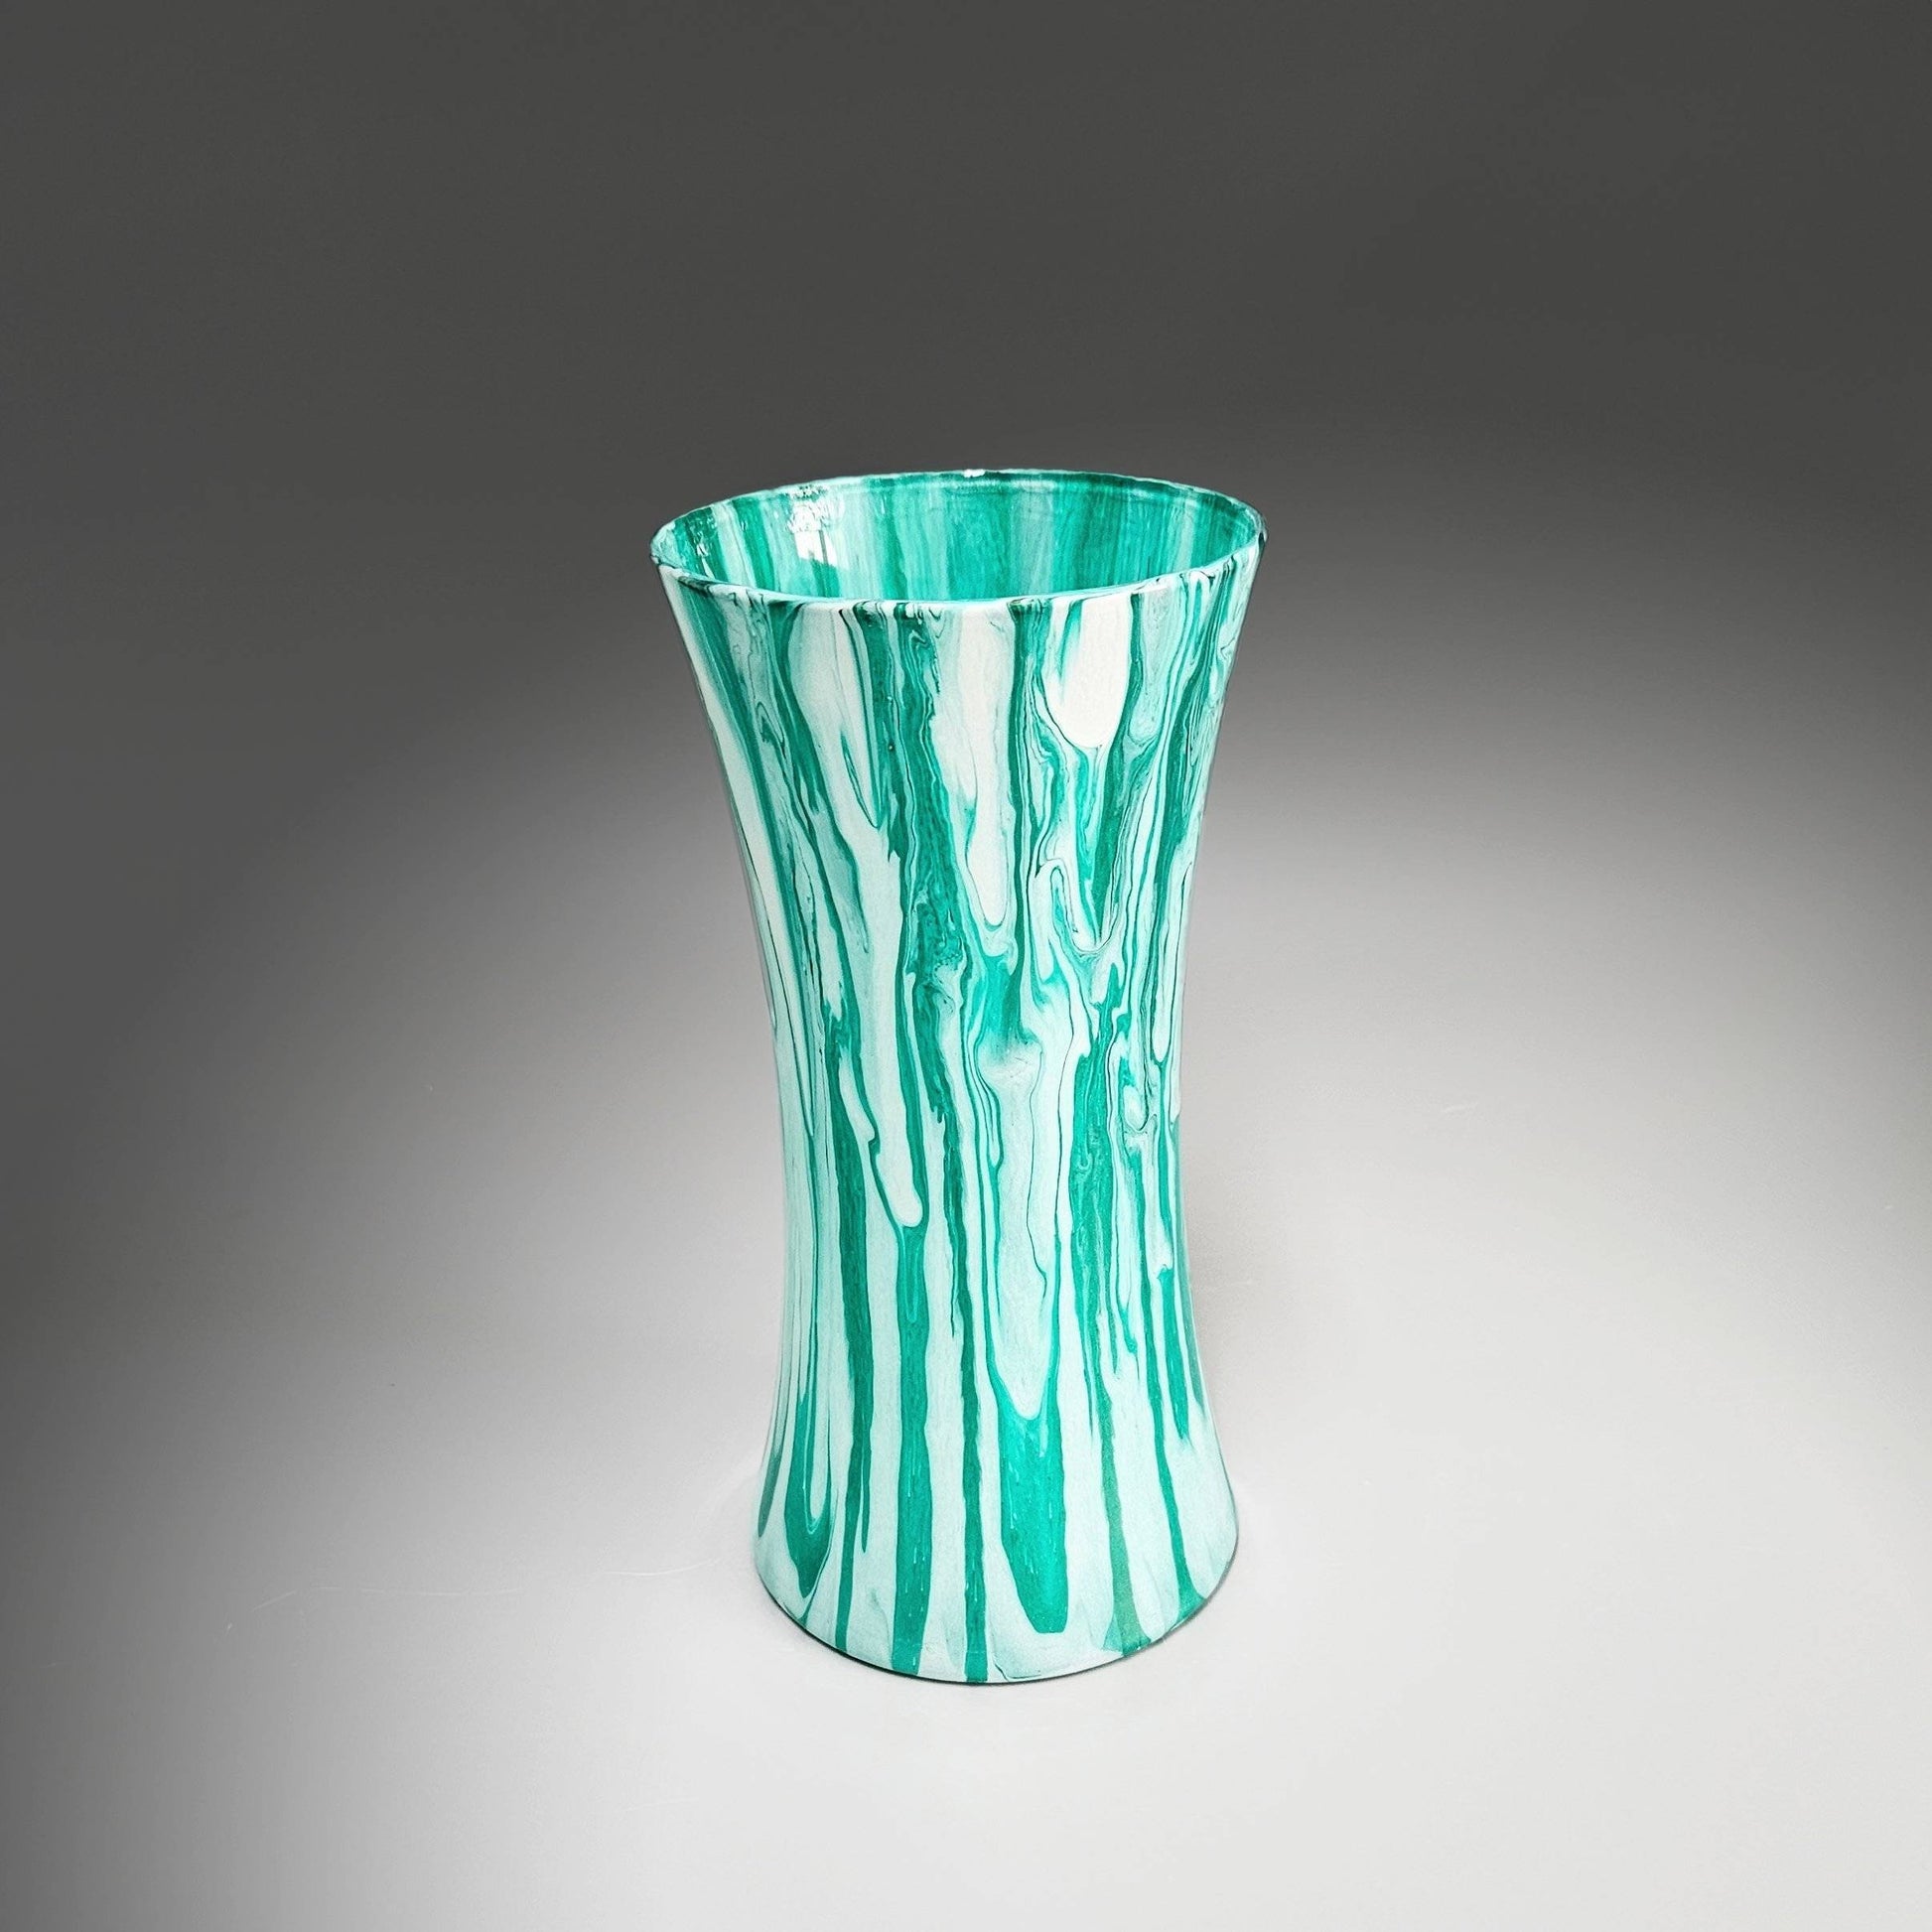 Painted Glass Vase in Green and White | Gifts That Leave Impressions